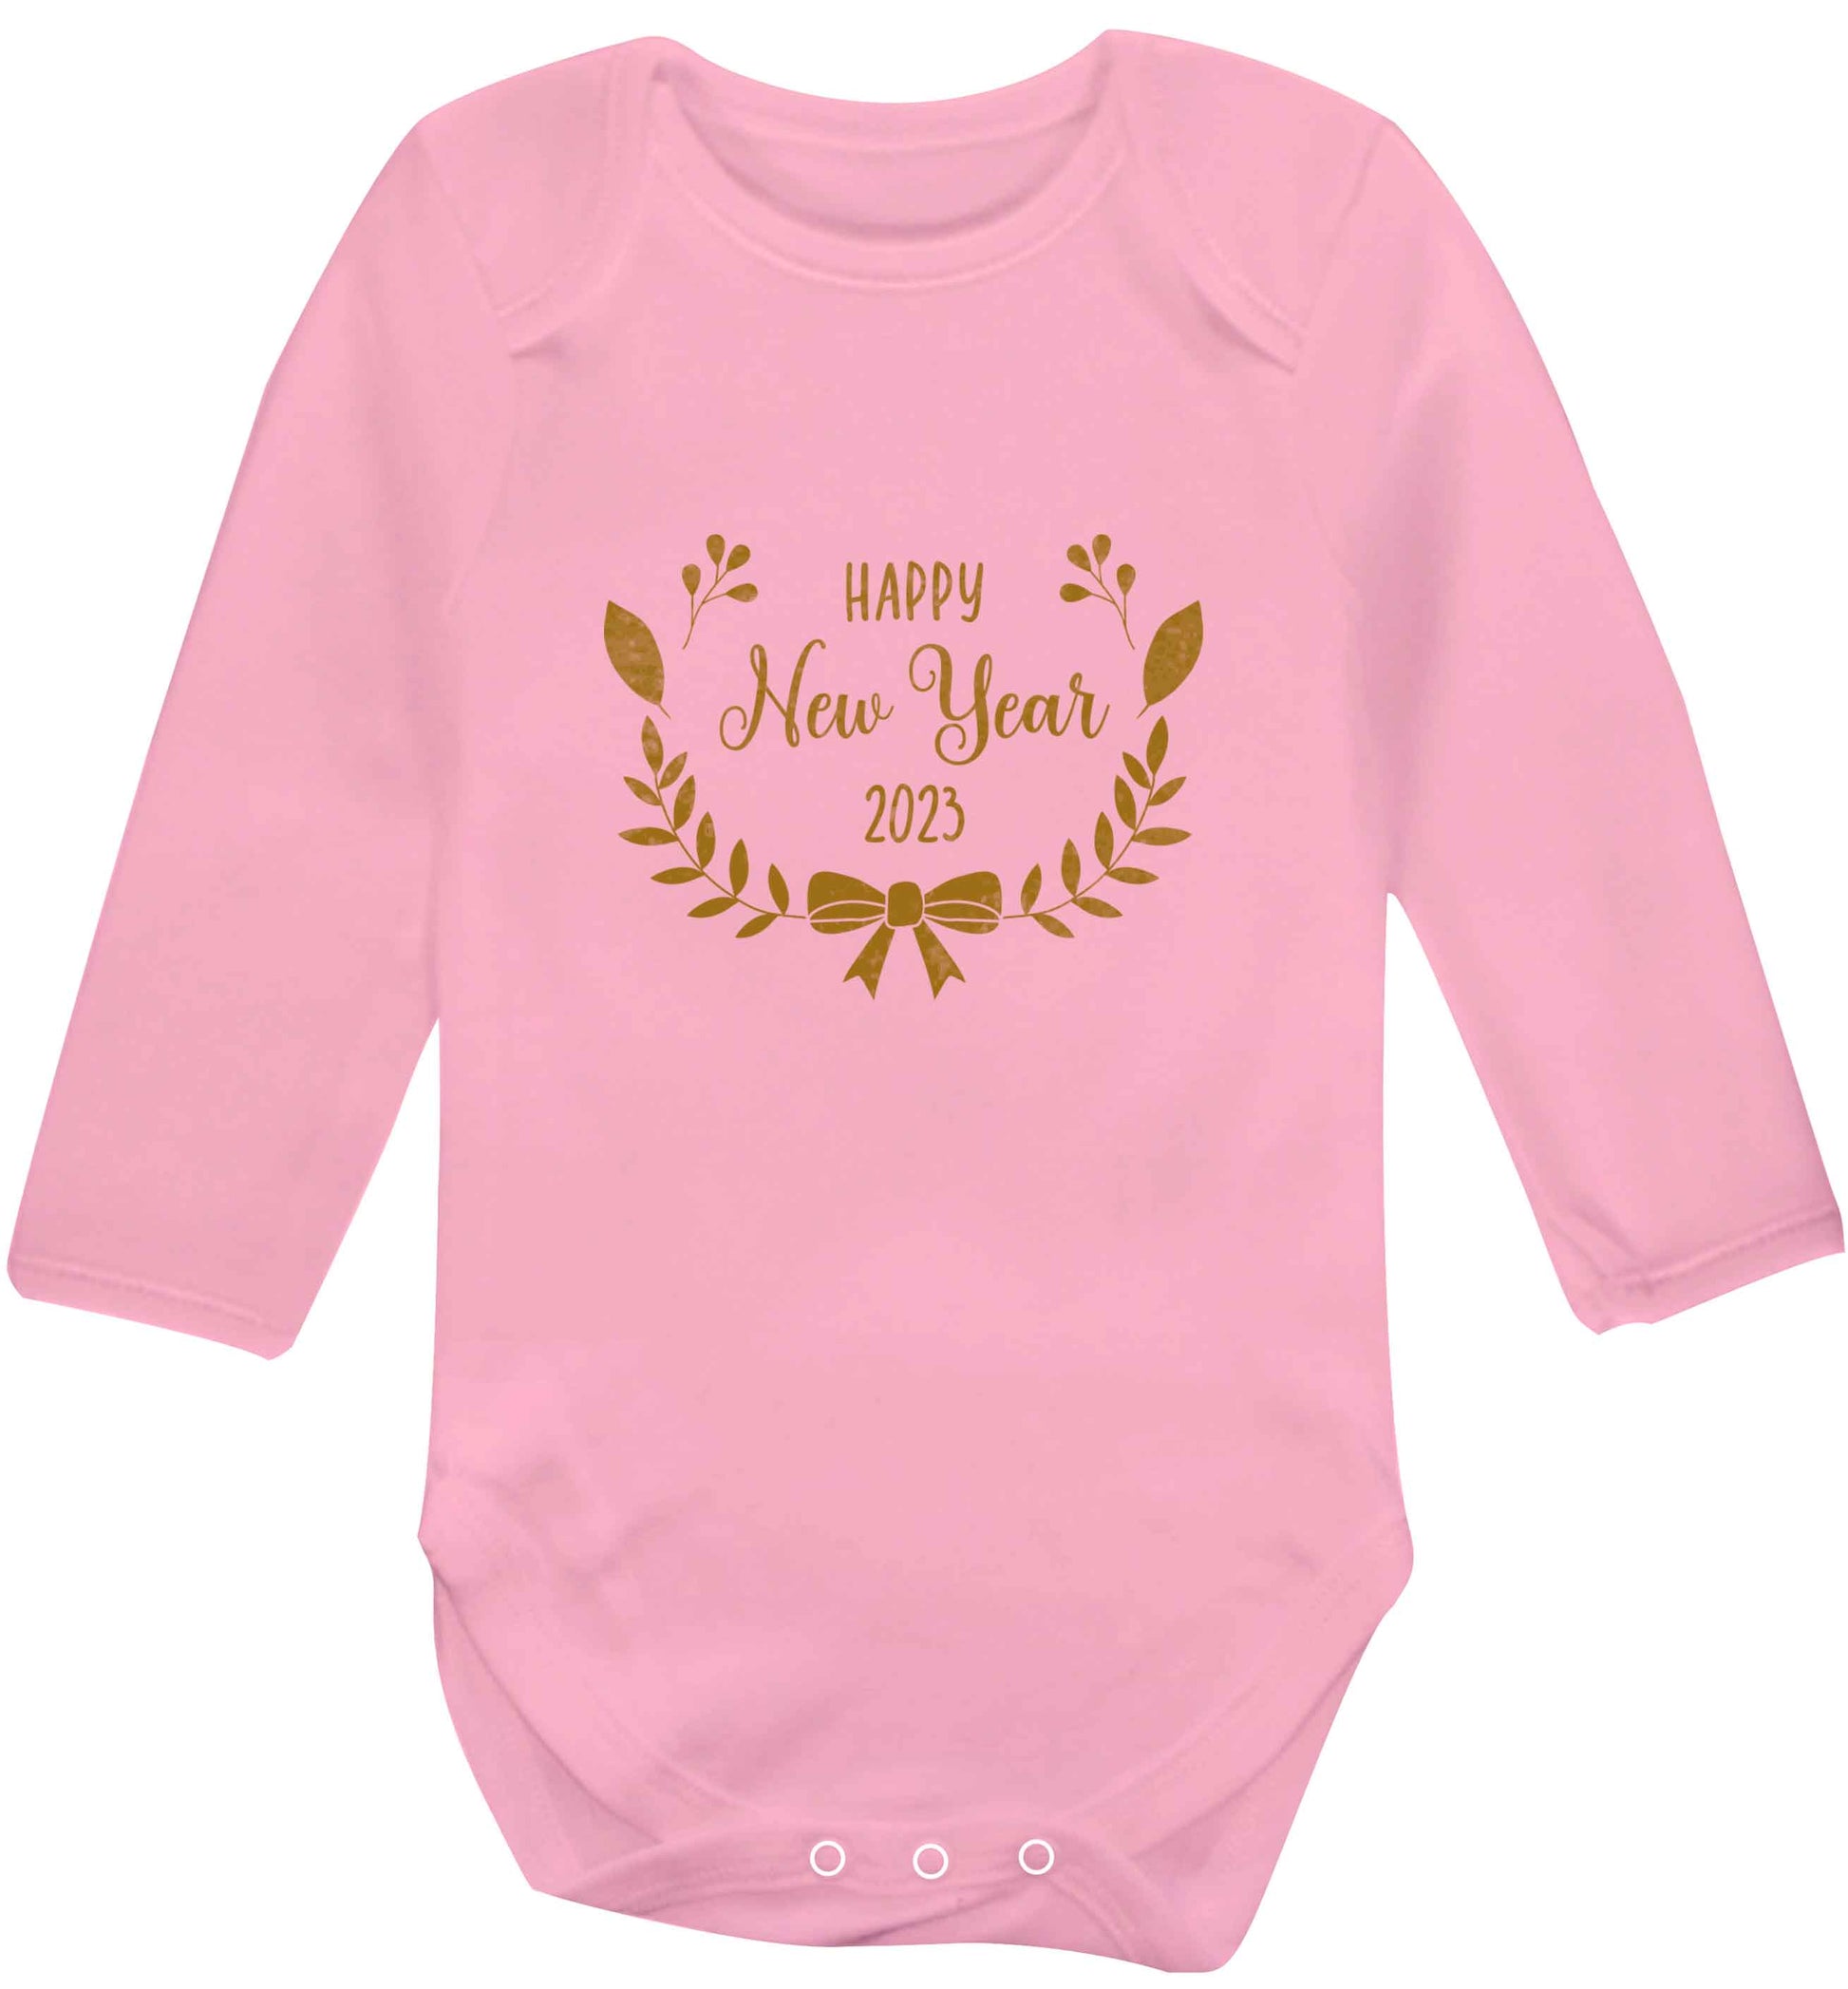 Happy New Year 2023 baby vest long sleeved pale pink 6-12 months